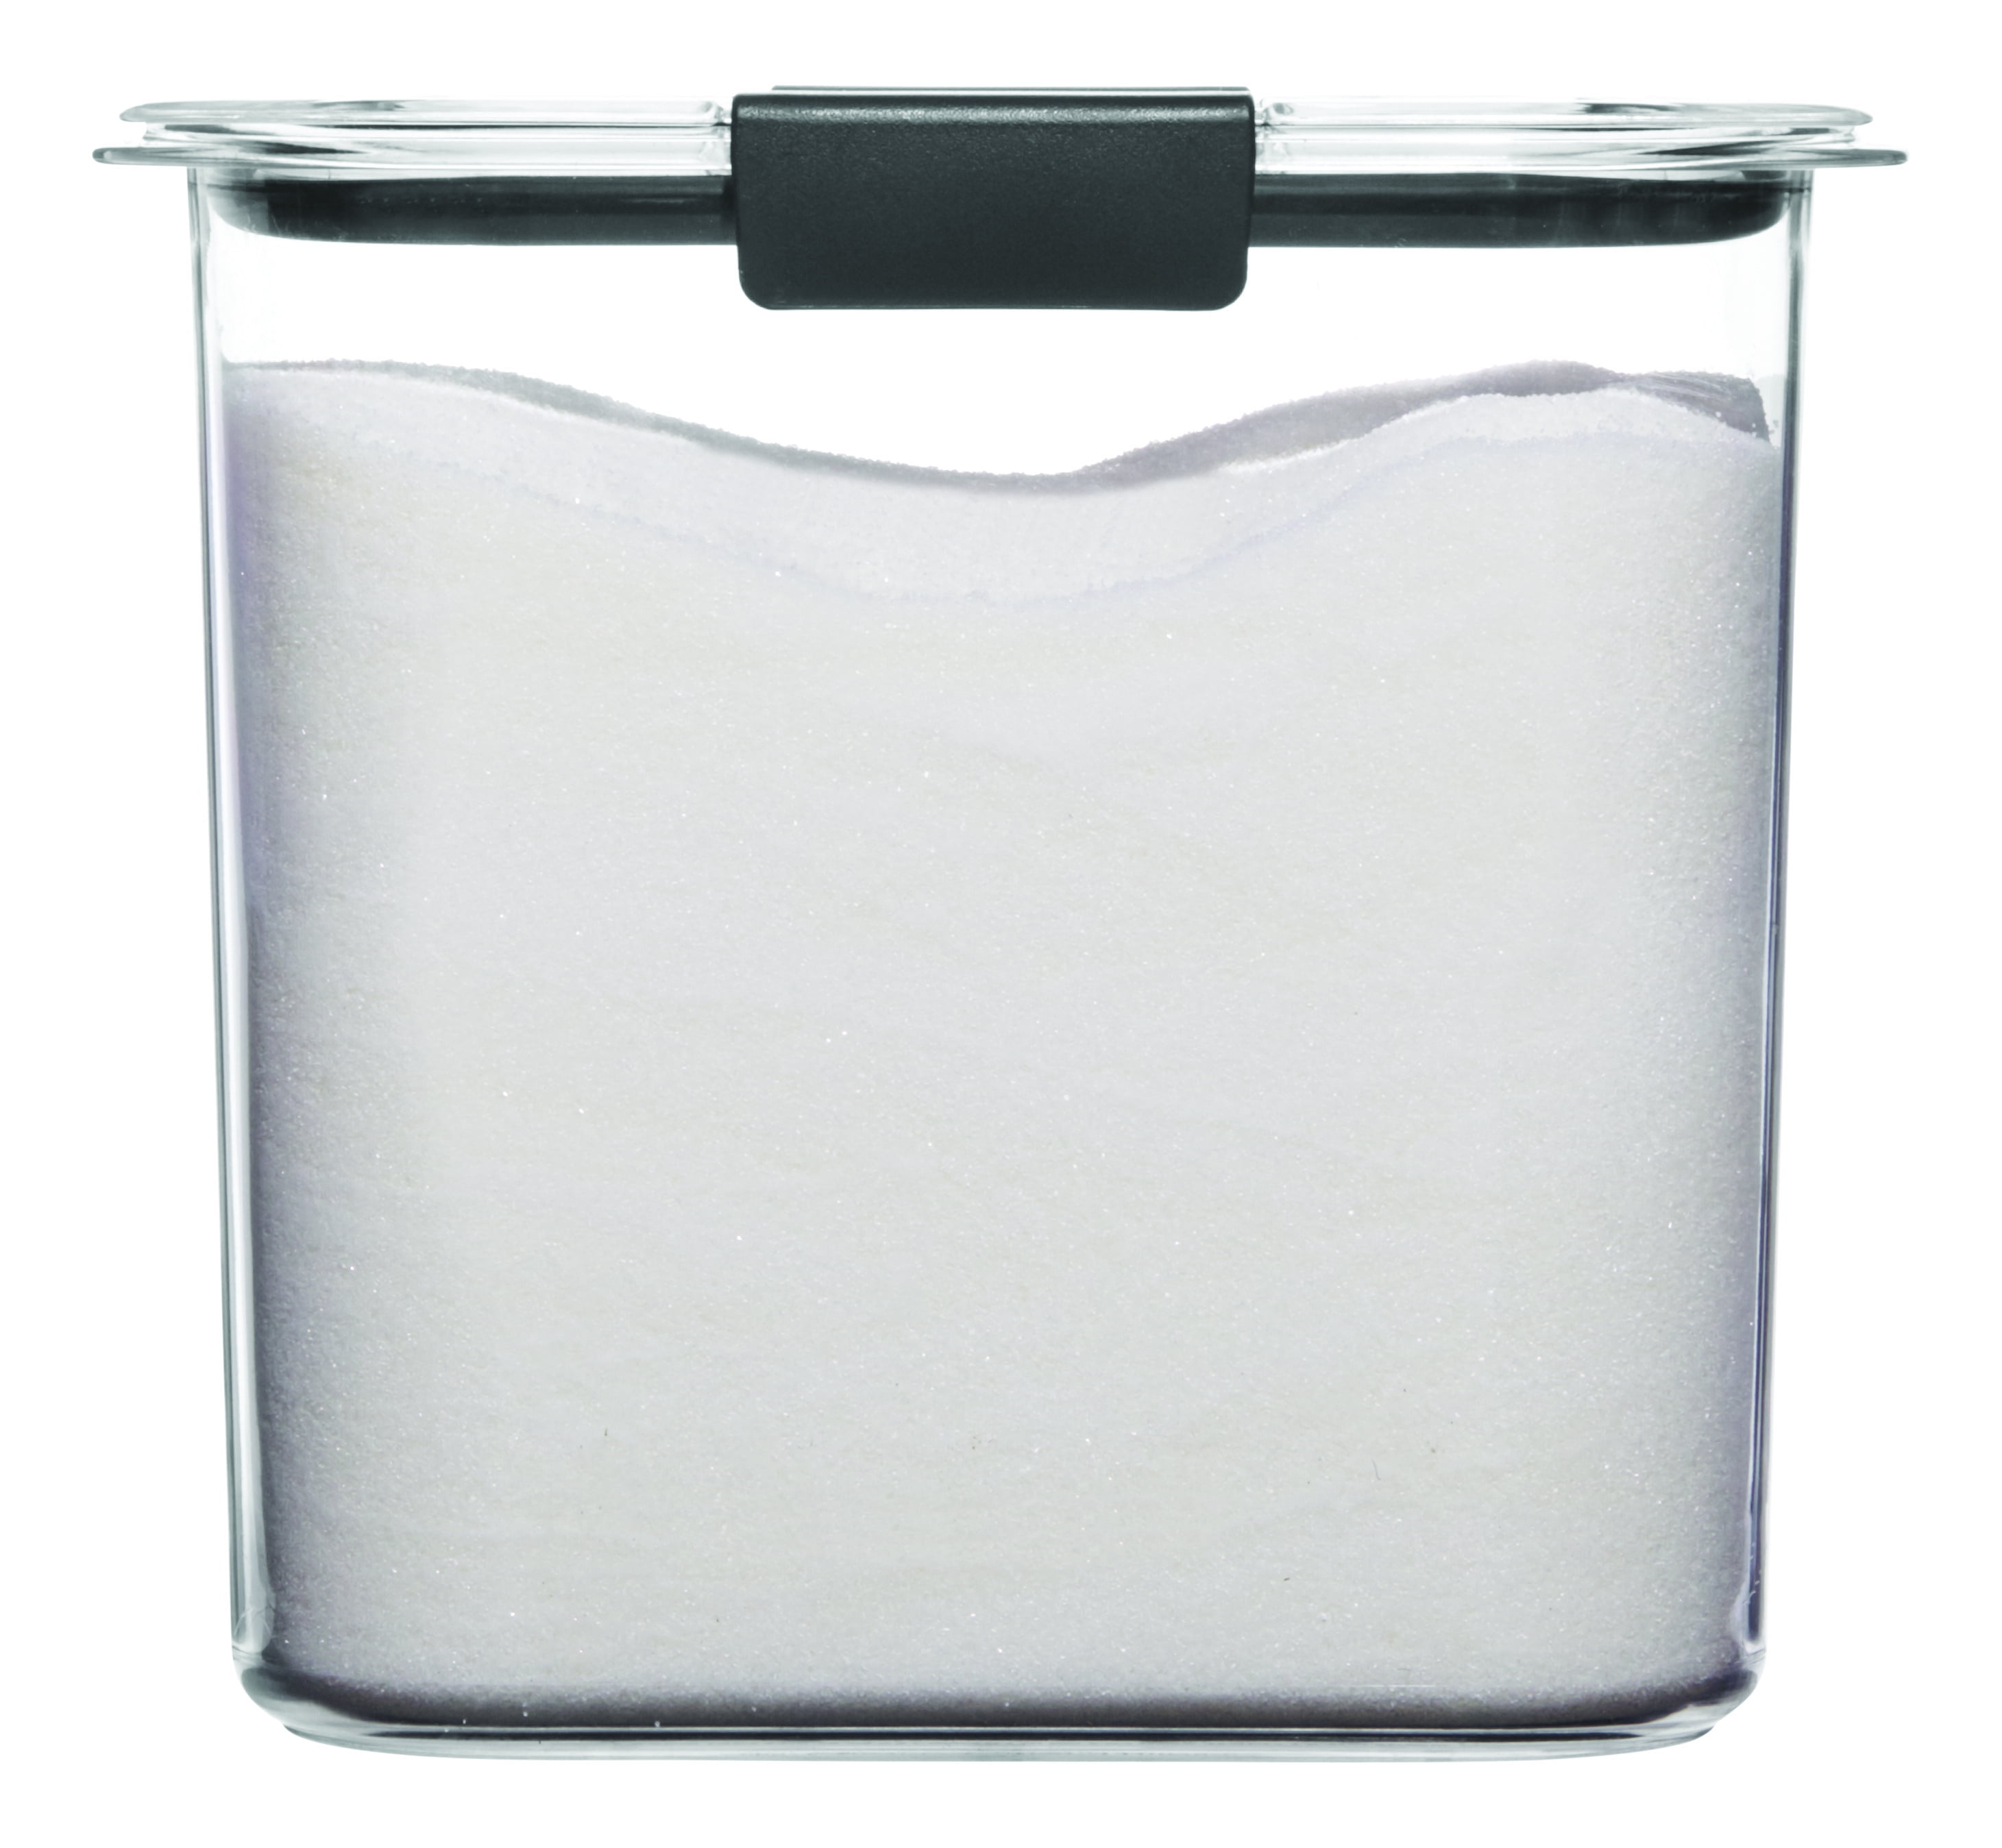 Rubbermaid Brilliance Pantry Storage Container, 19.9 Cup, Dishwasher Safe 